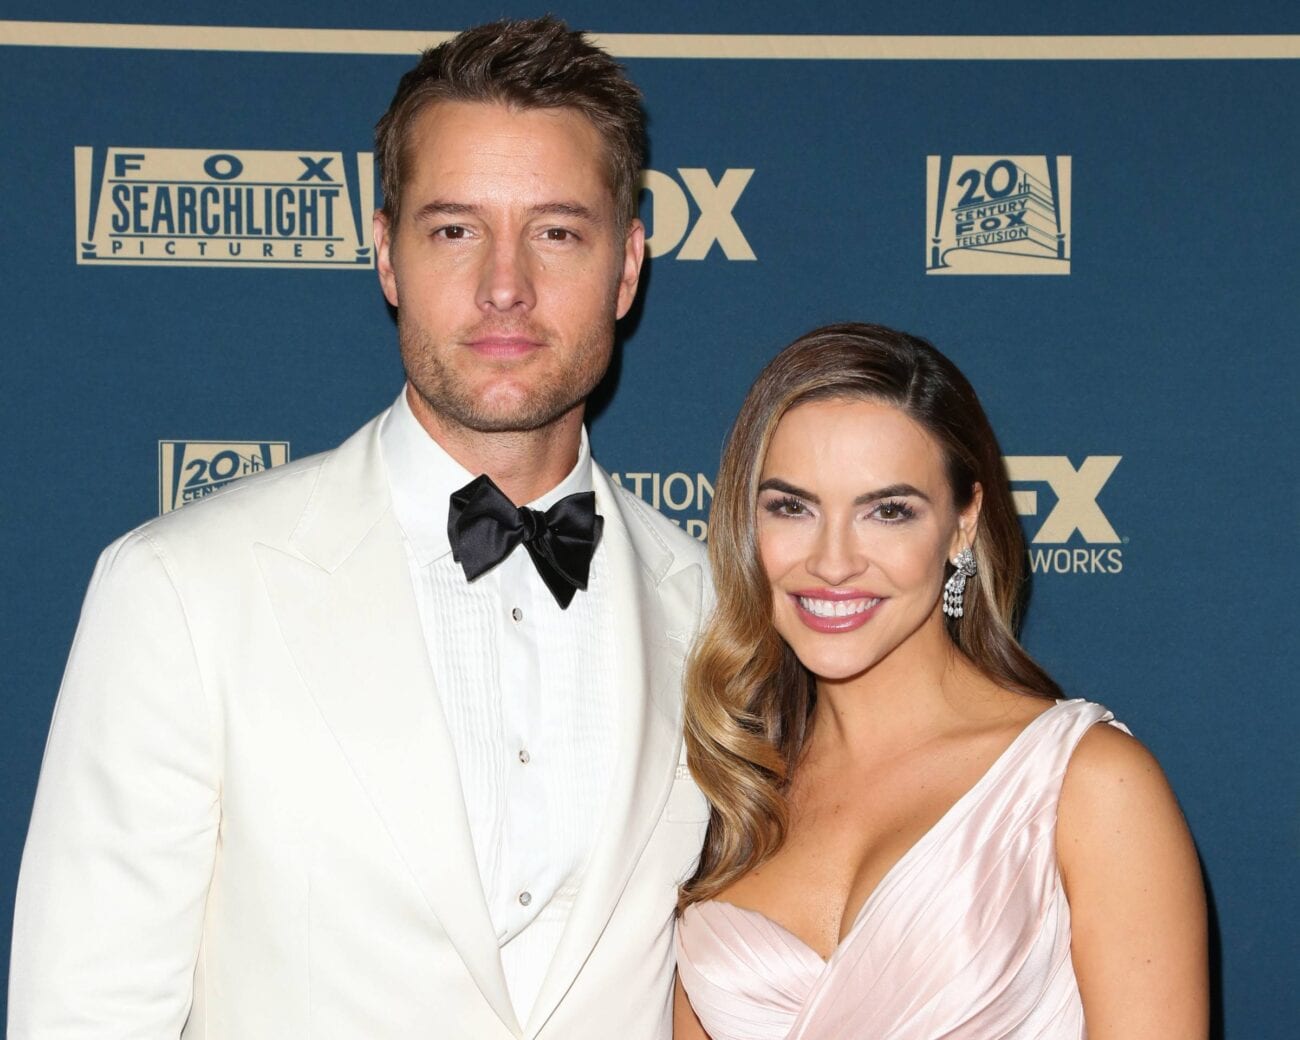 The divorce between Justin Hartley and Chrishell Stause seems odd, but nobody knows exactly why.